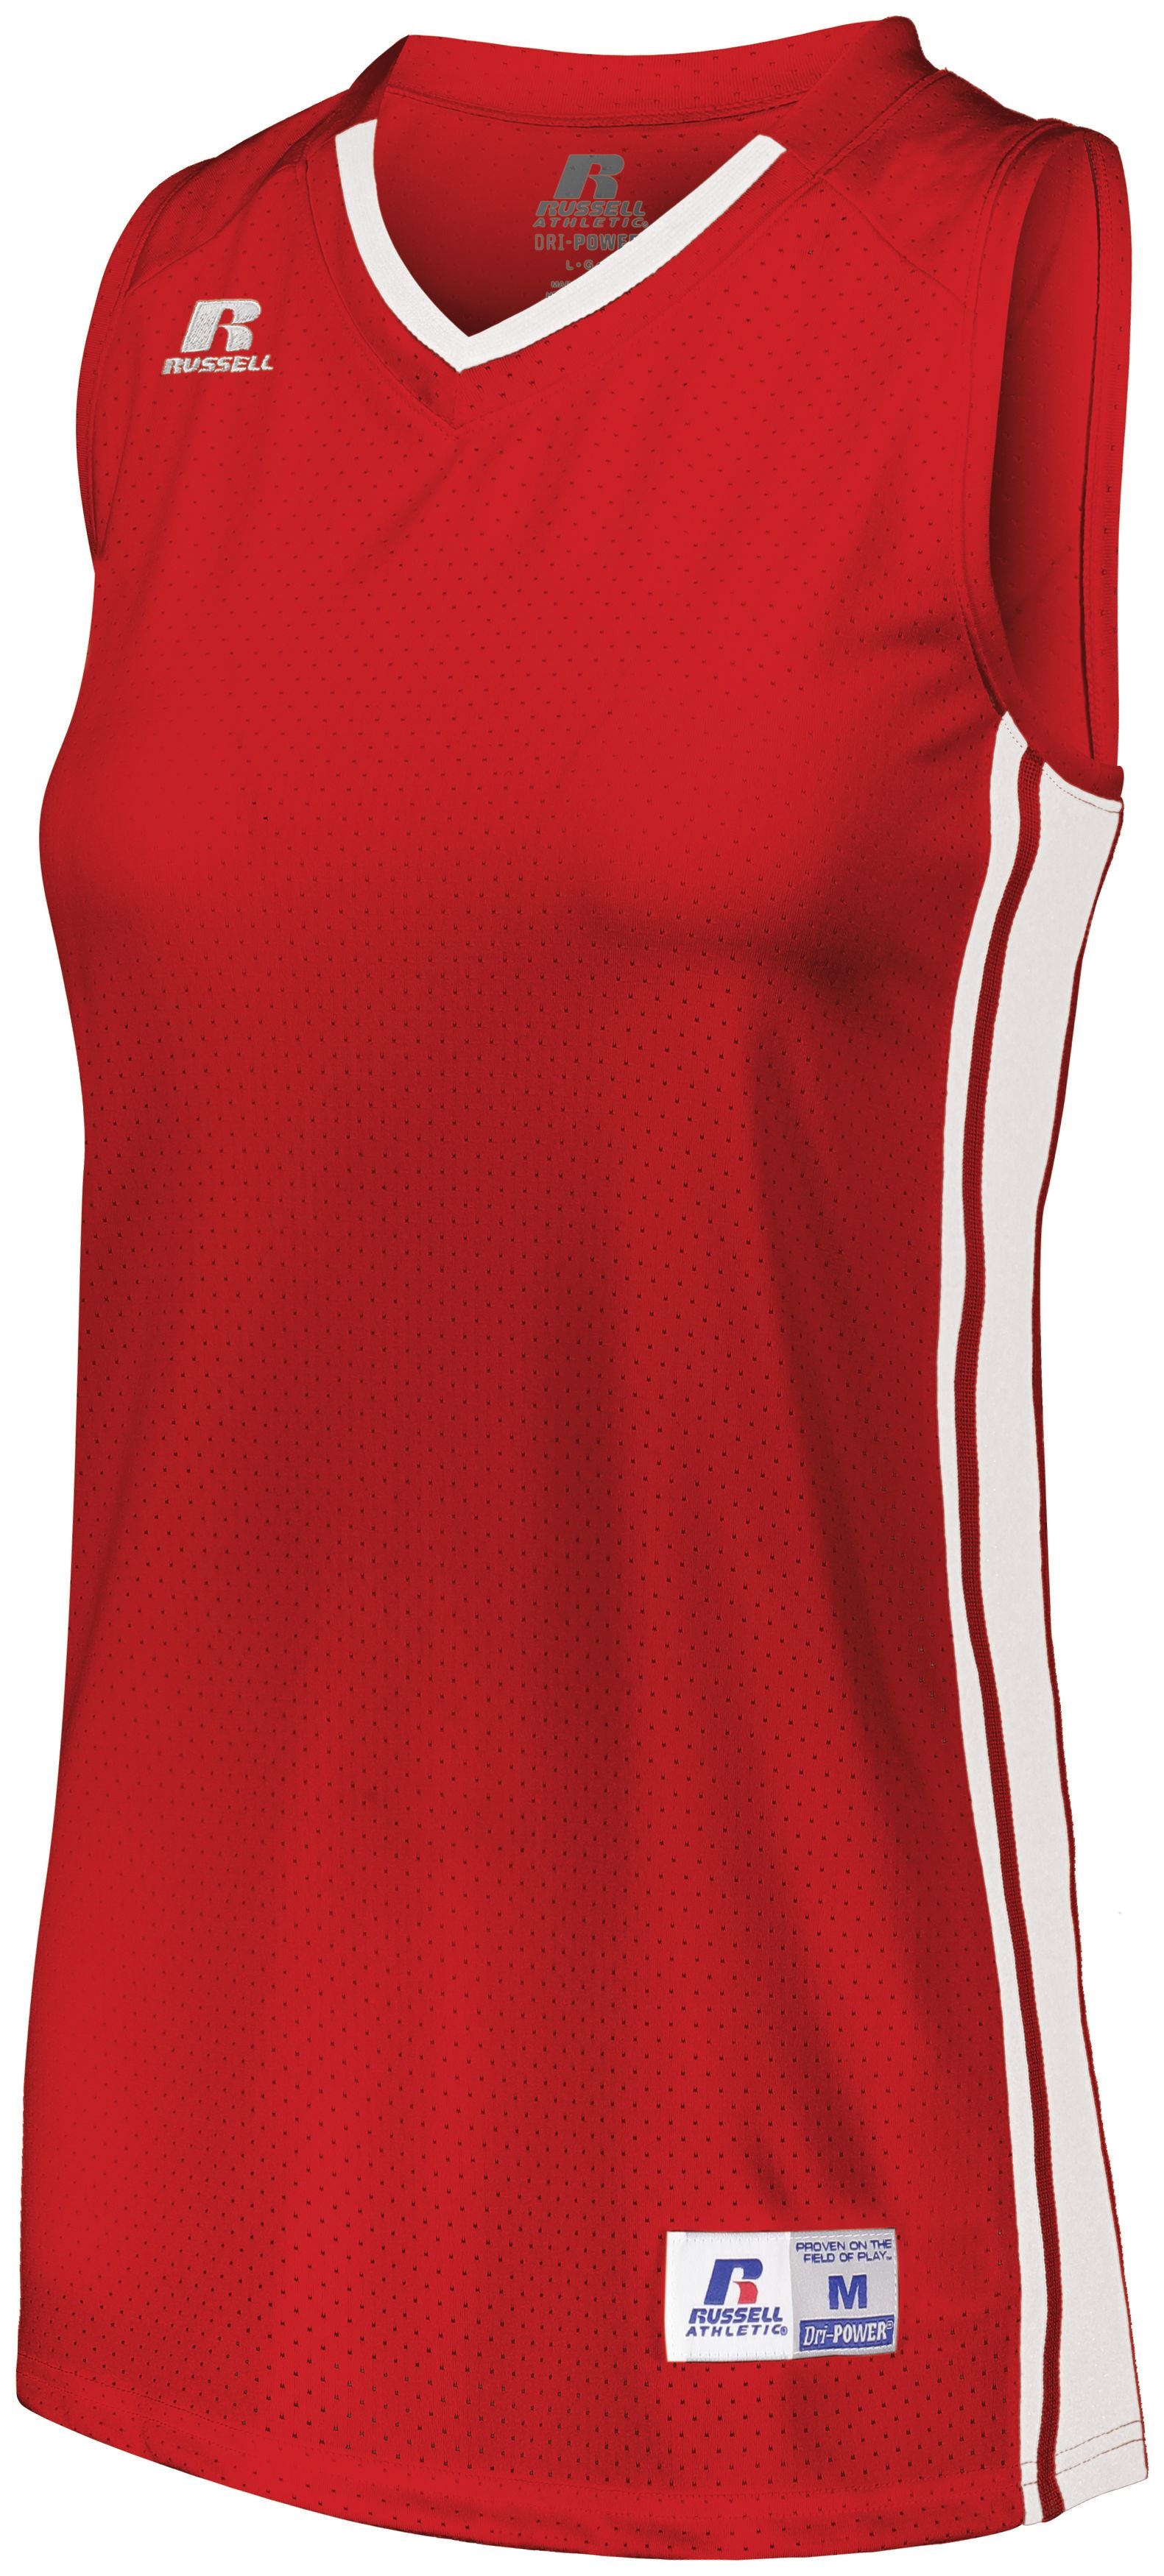 Russell Athletic Ladies Legacy Basketball Jersey in True Red/White  -Part of the Ladies, Ladies-Jersey, Basketball, Russell-Athletic-Products, Shirts, All-Sports, All-Sports-1 product lines at KanaleyCreations.com